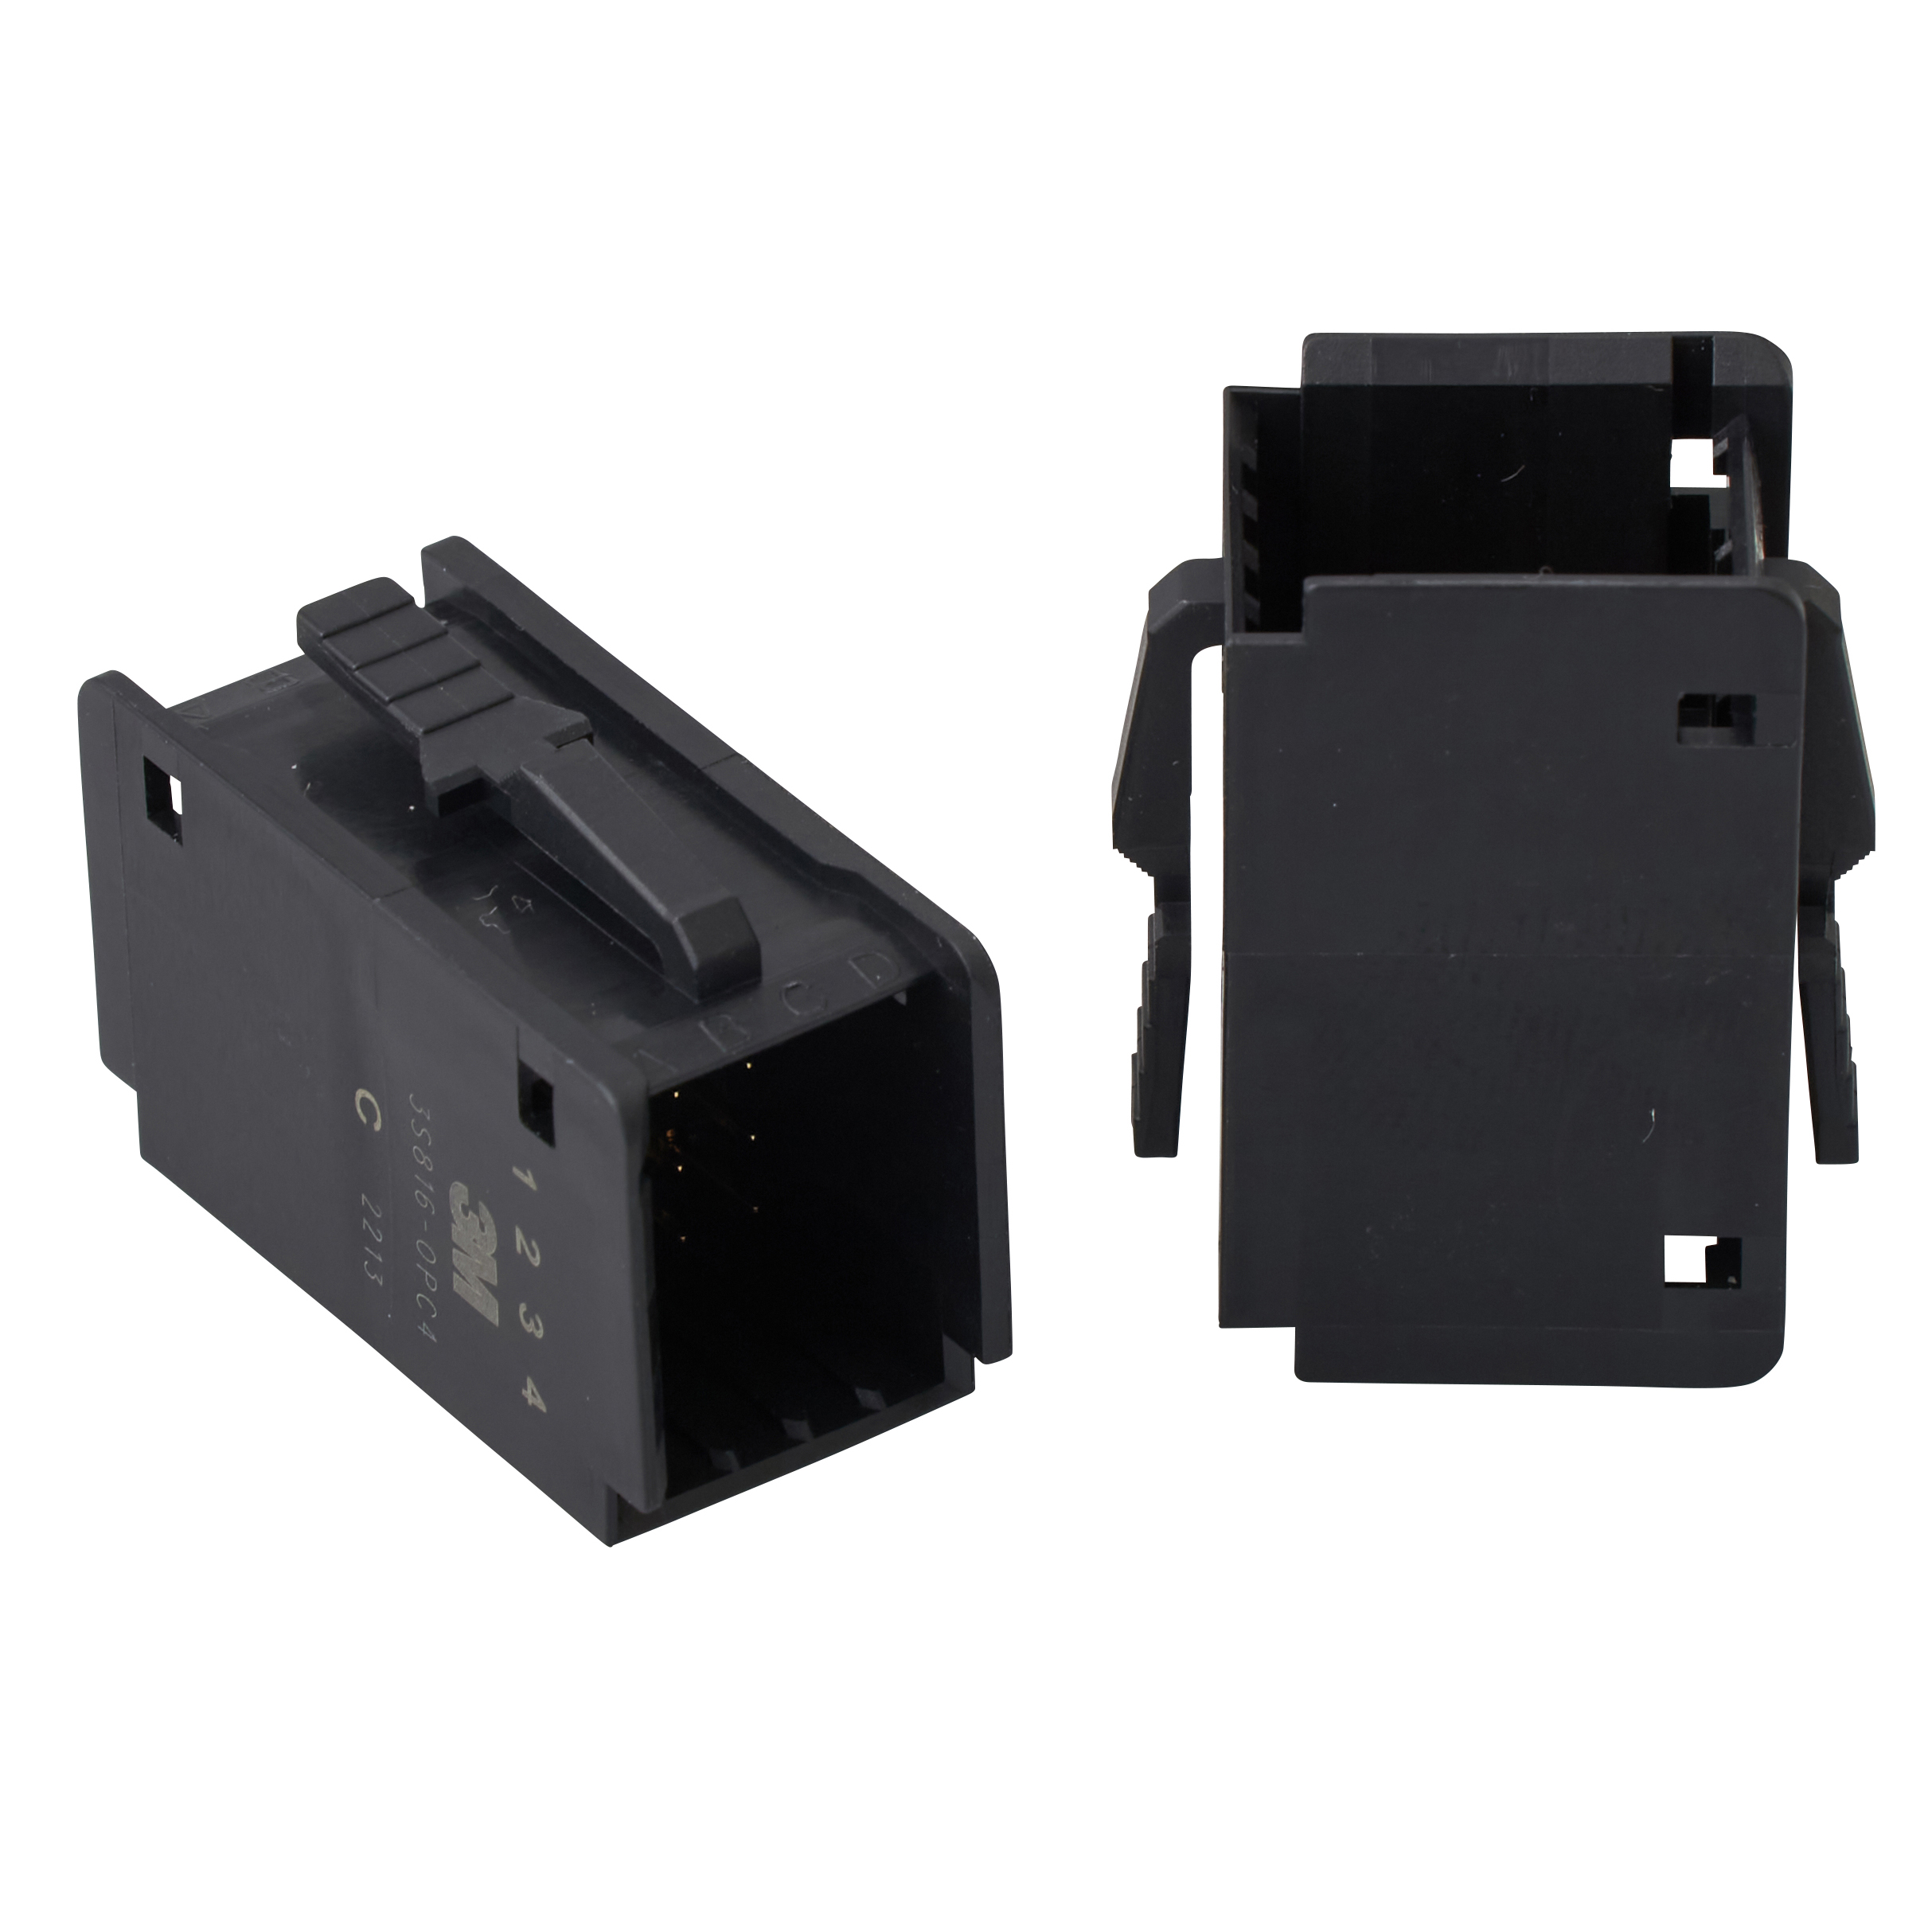 【3S816-0PC4-B00 PS】MINI STACK CONNECTOR JUNCTION HE